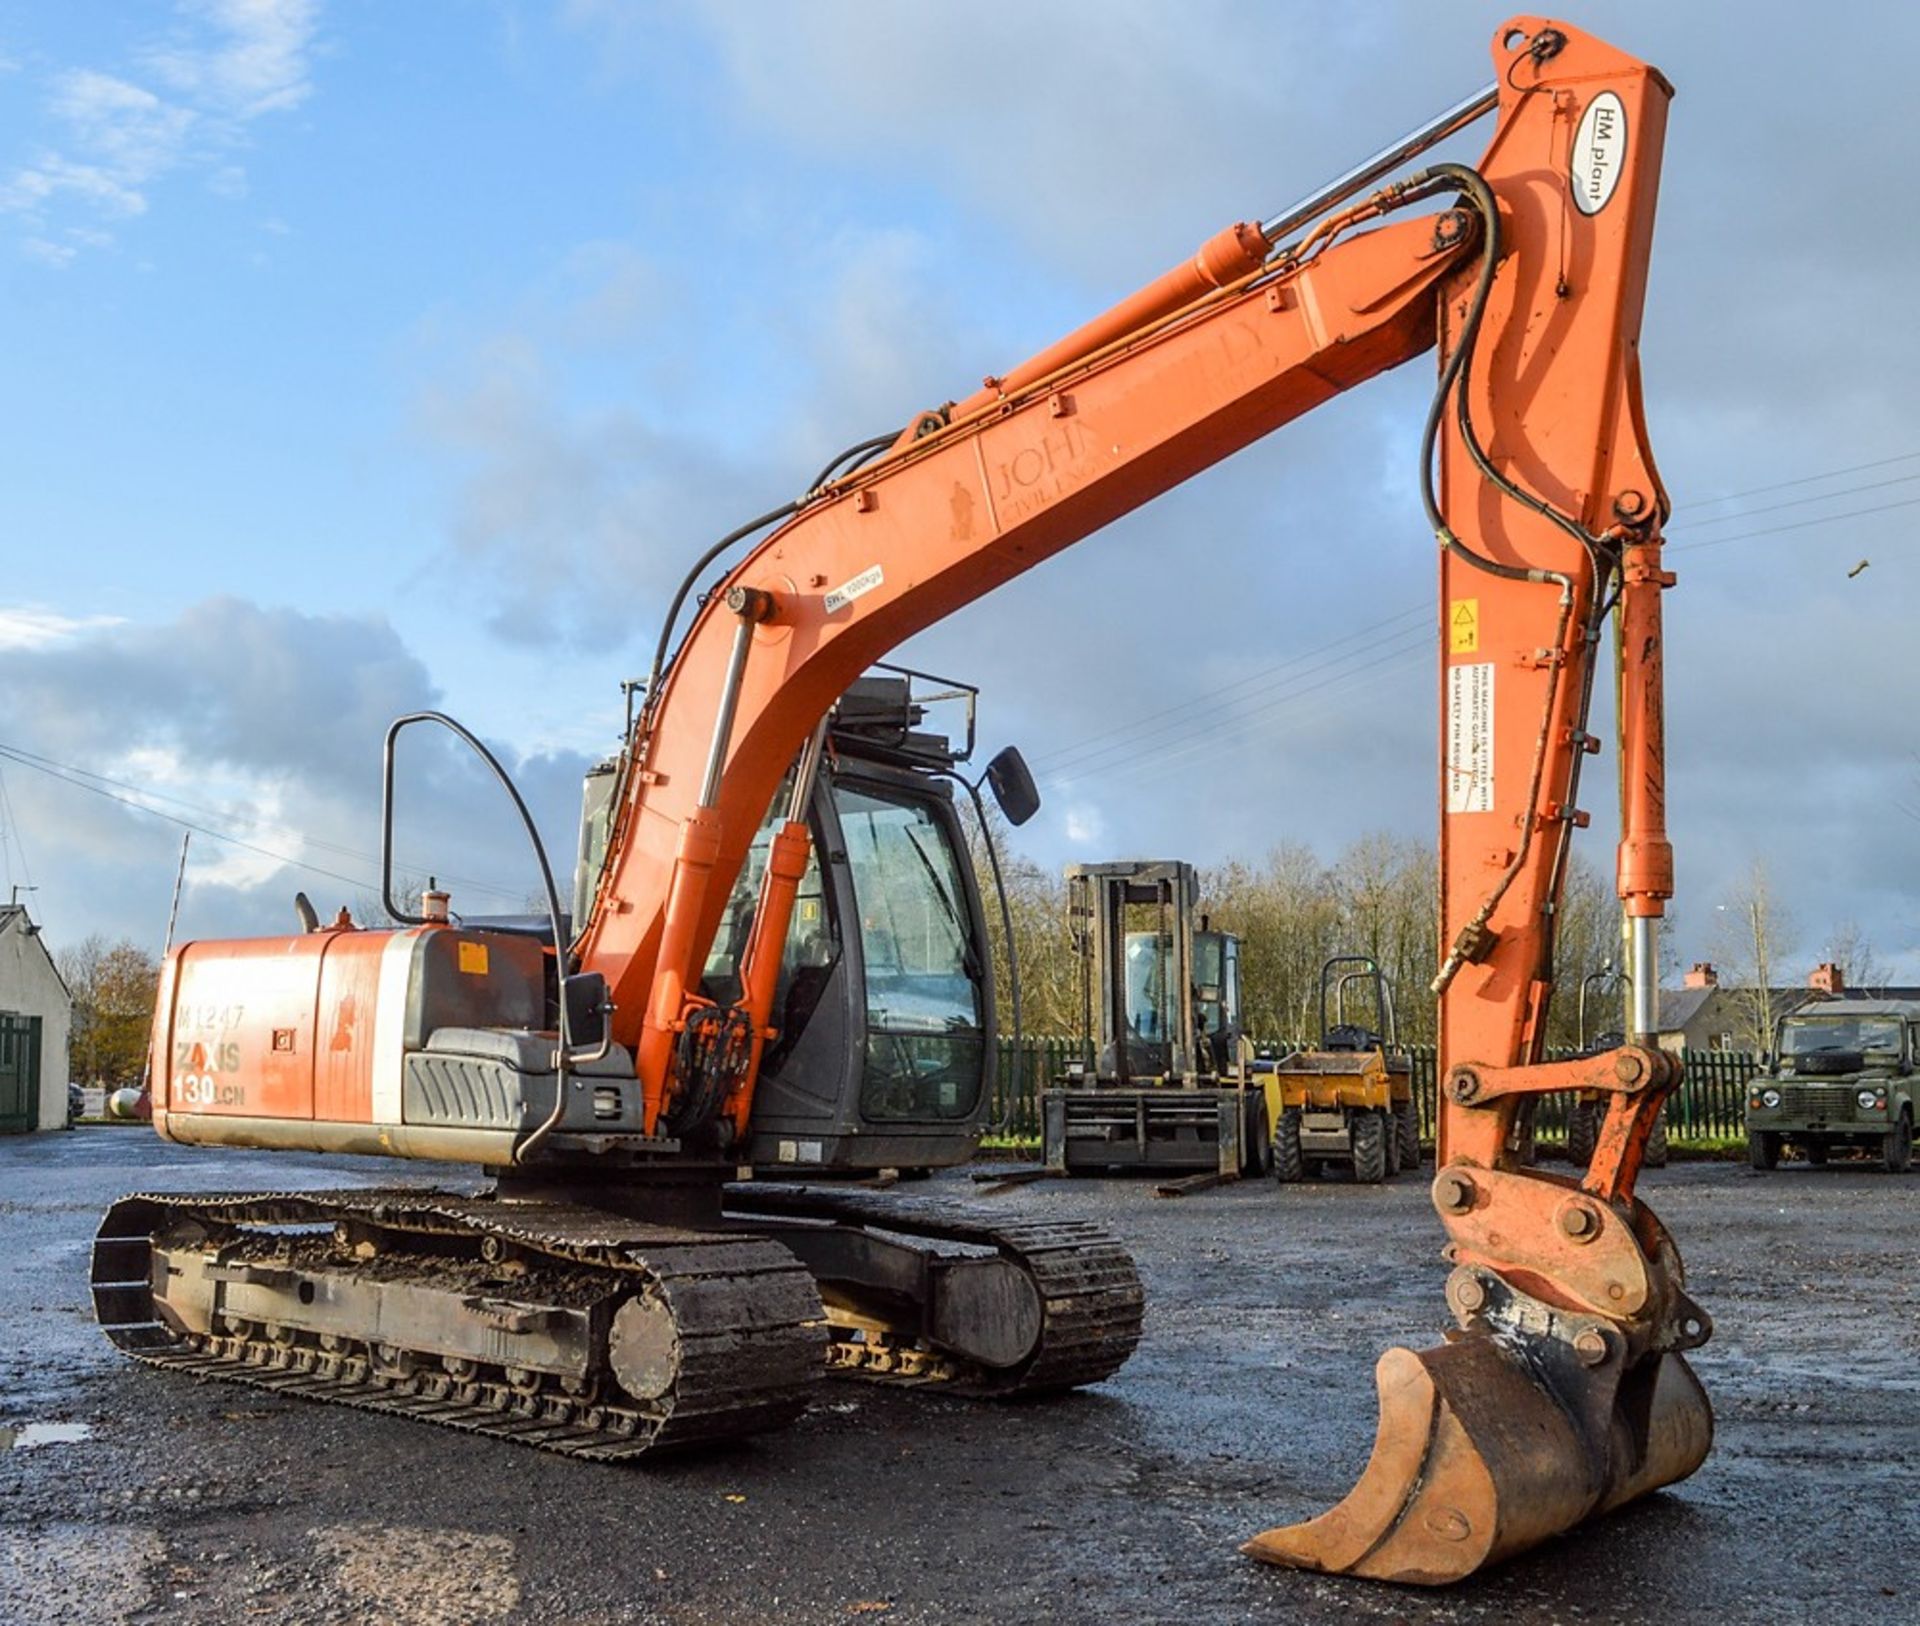 Hitachi Zaxis 130 LCN 13 tonne steel tracked excavator Year: 2010 S/N: 83215 Recorded Hours: 9686